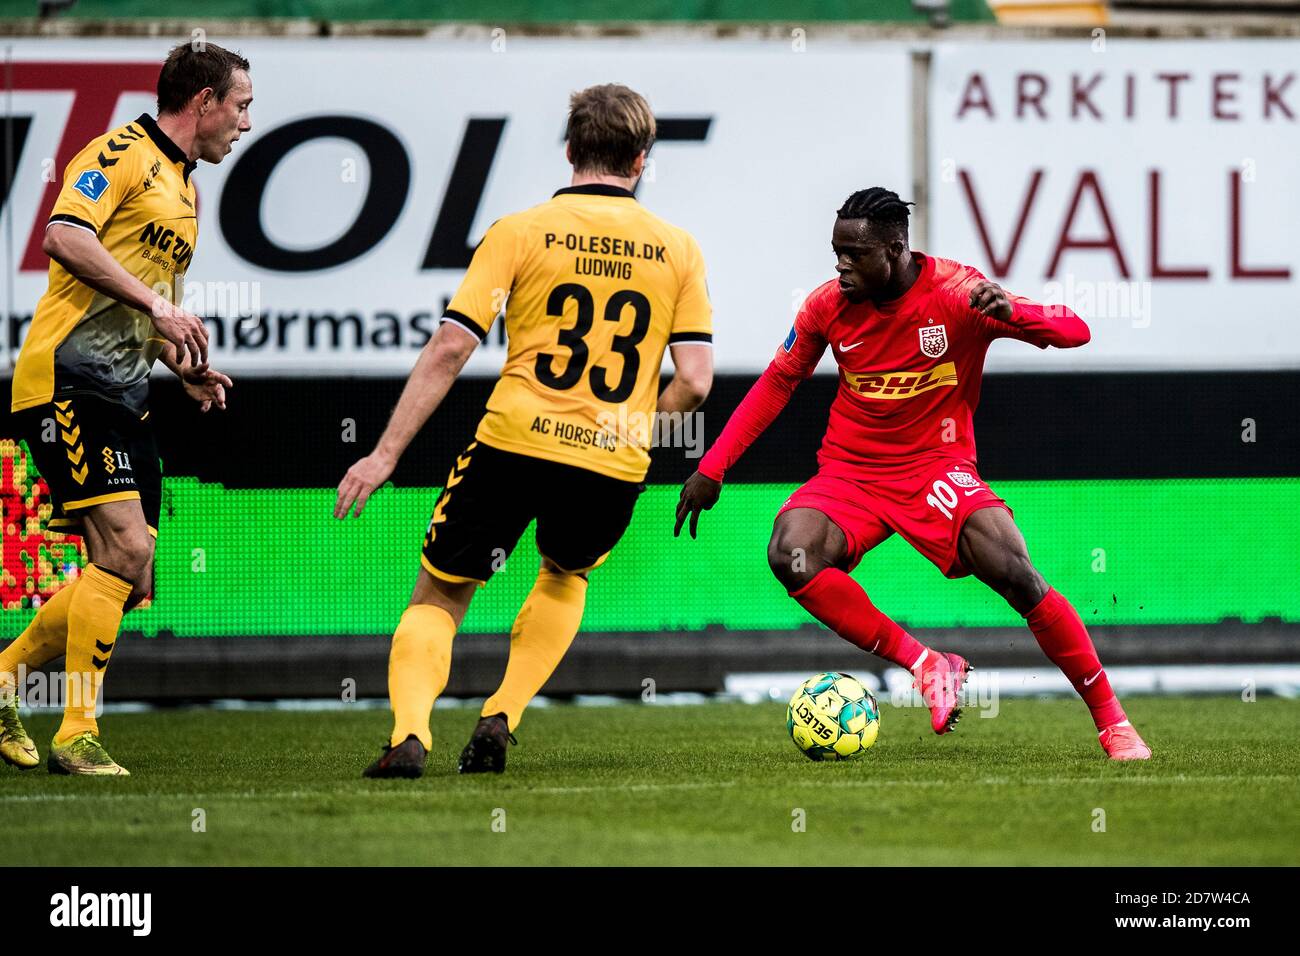 Horsens, Denmark. 25th 2020. Sulemana (10) of FC Nordsjaelland seen during the 3F Superliga match between AC Horsens and FC at Casa Arena in Horsens. Credit: Gonzales Photo/Alamy